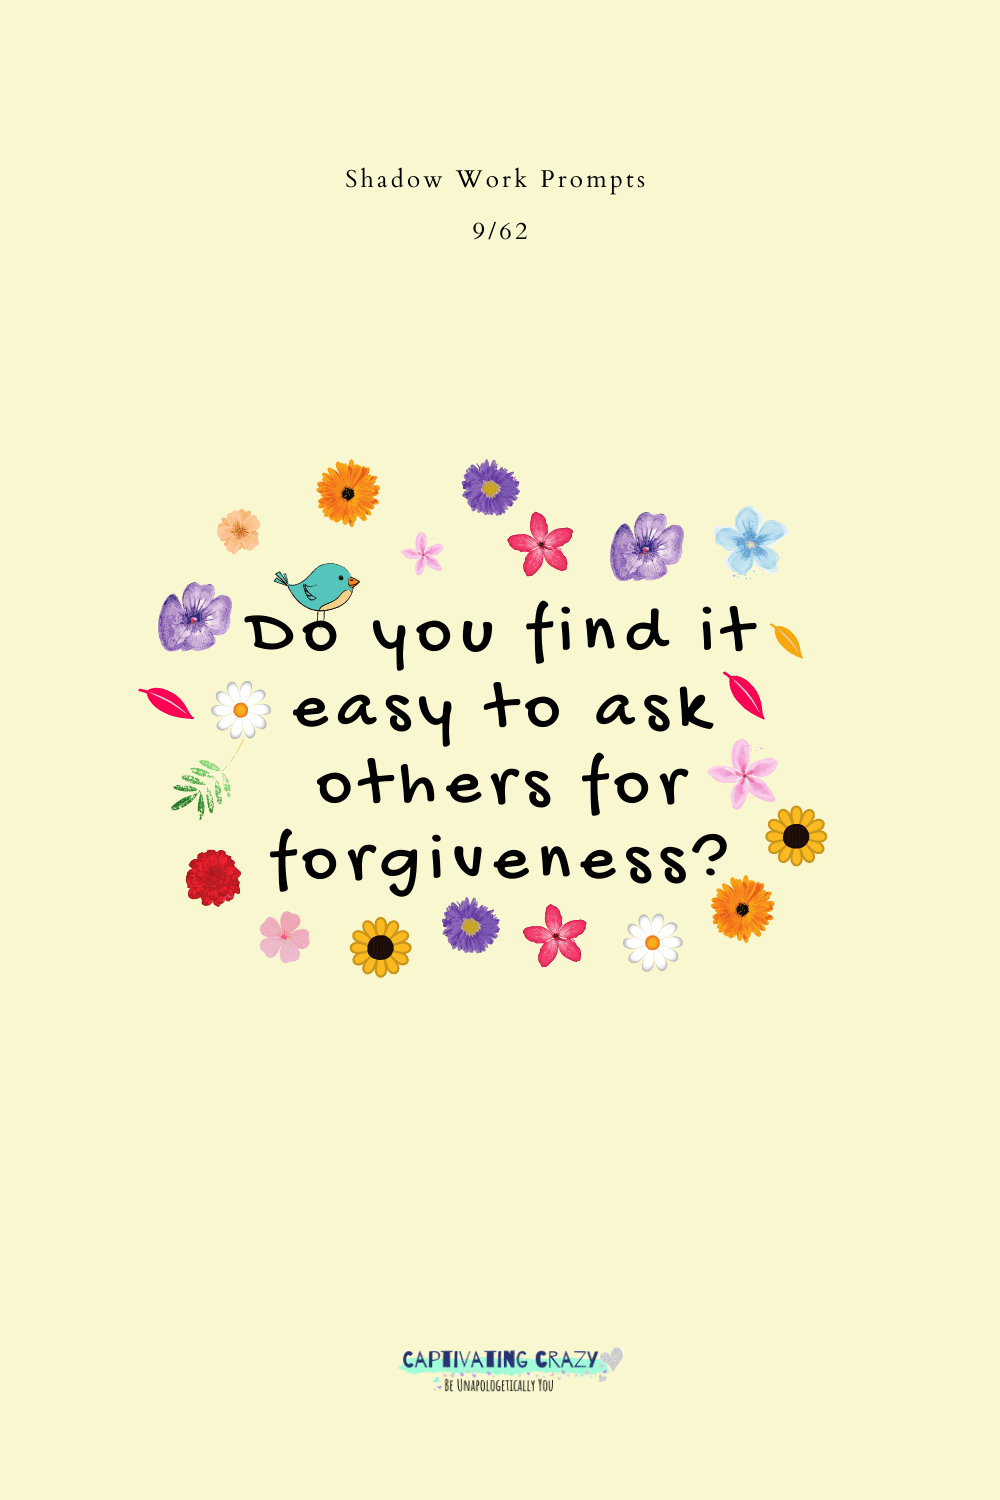 Do you find it easy to ask others for forgiveness?